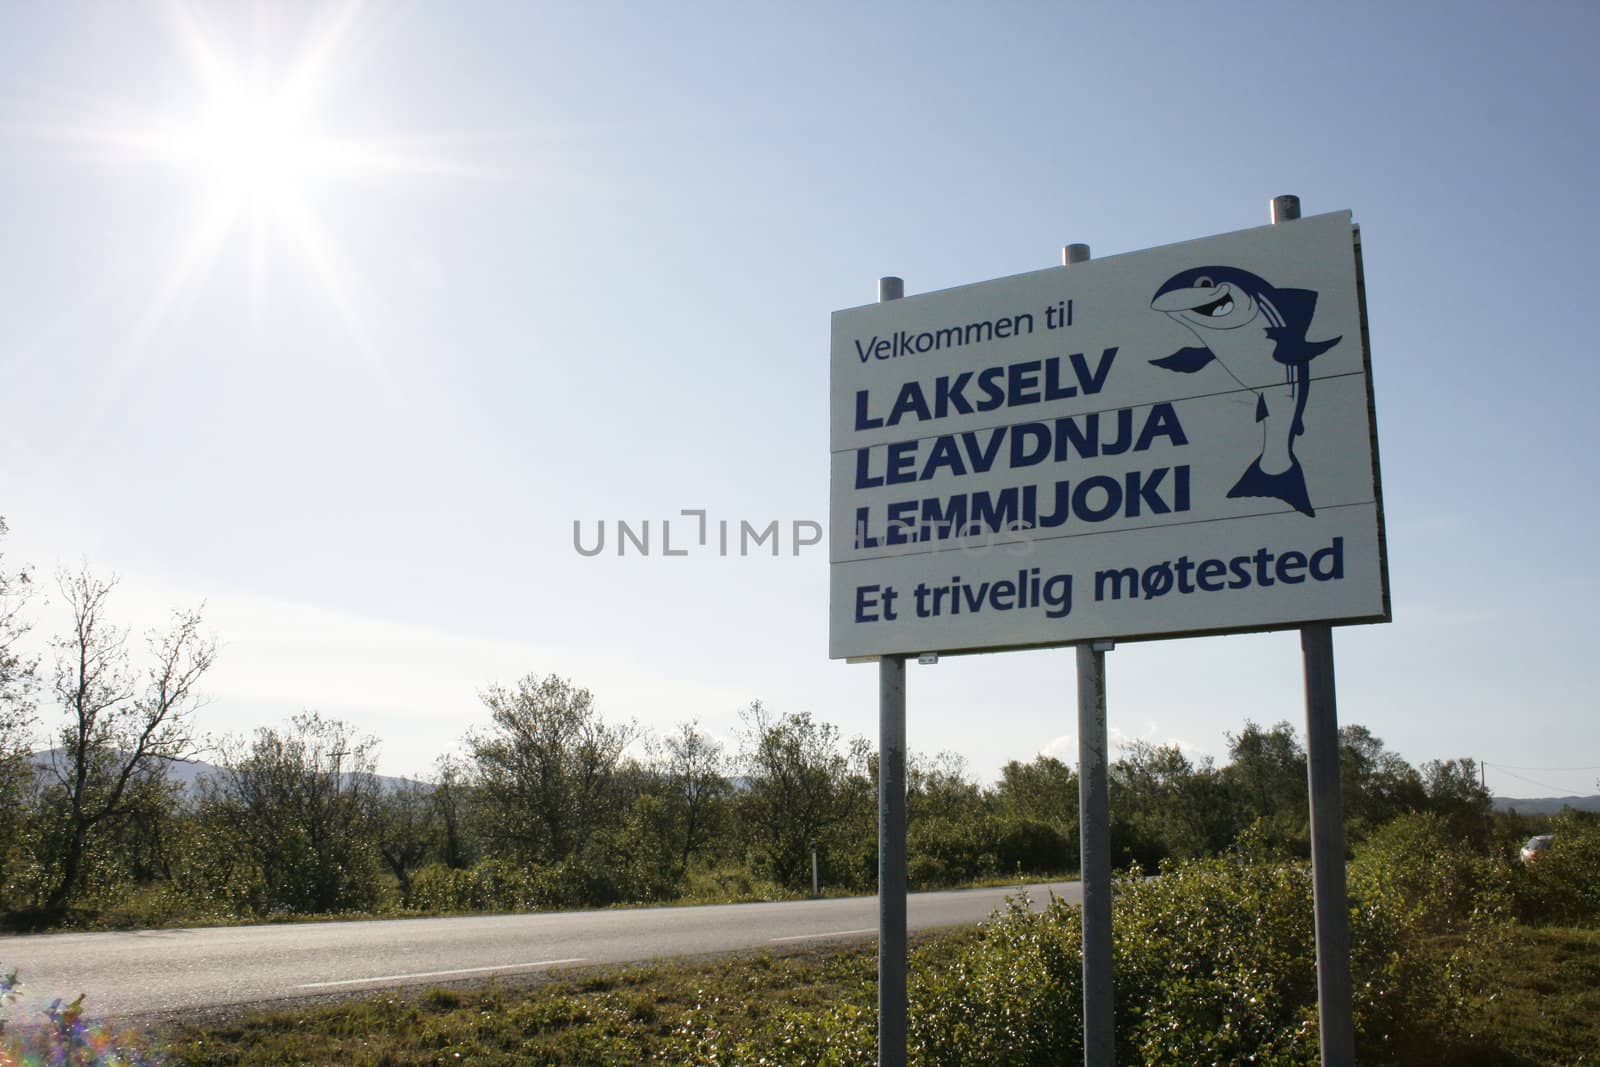 Welcome to Lakselv by pingster